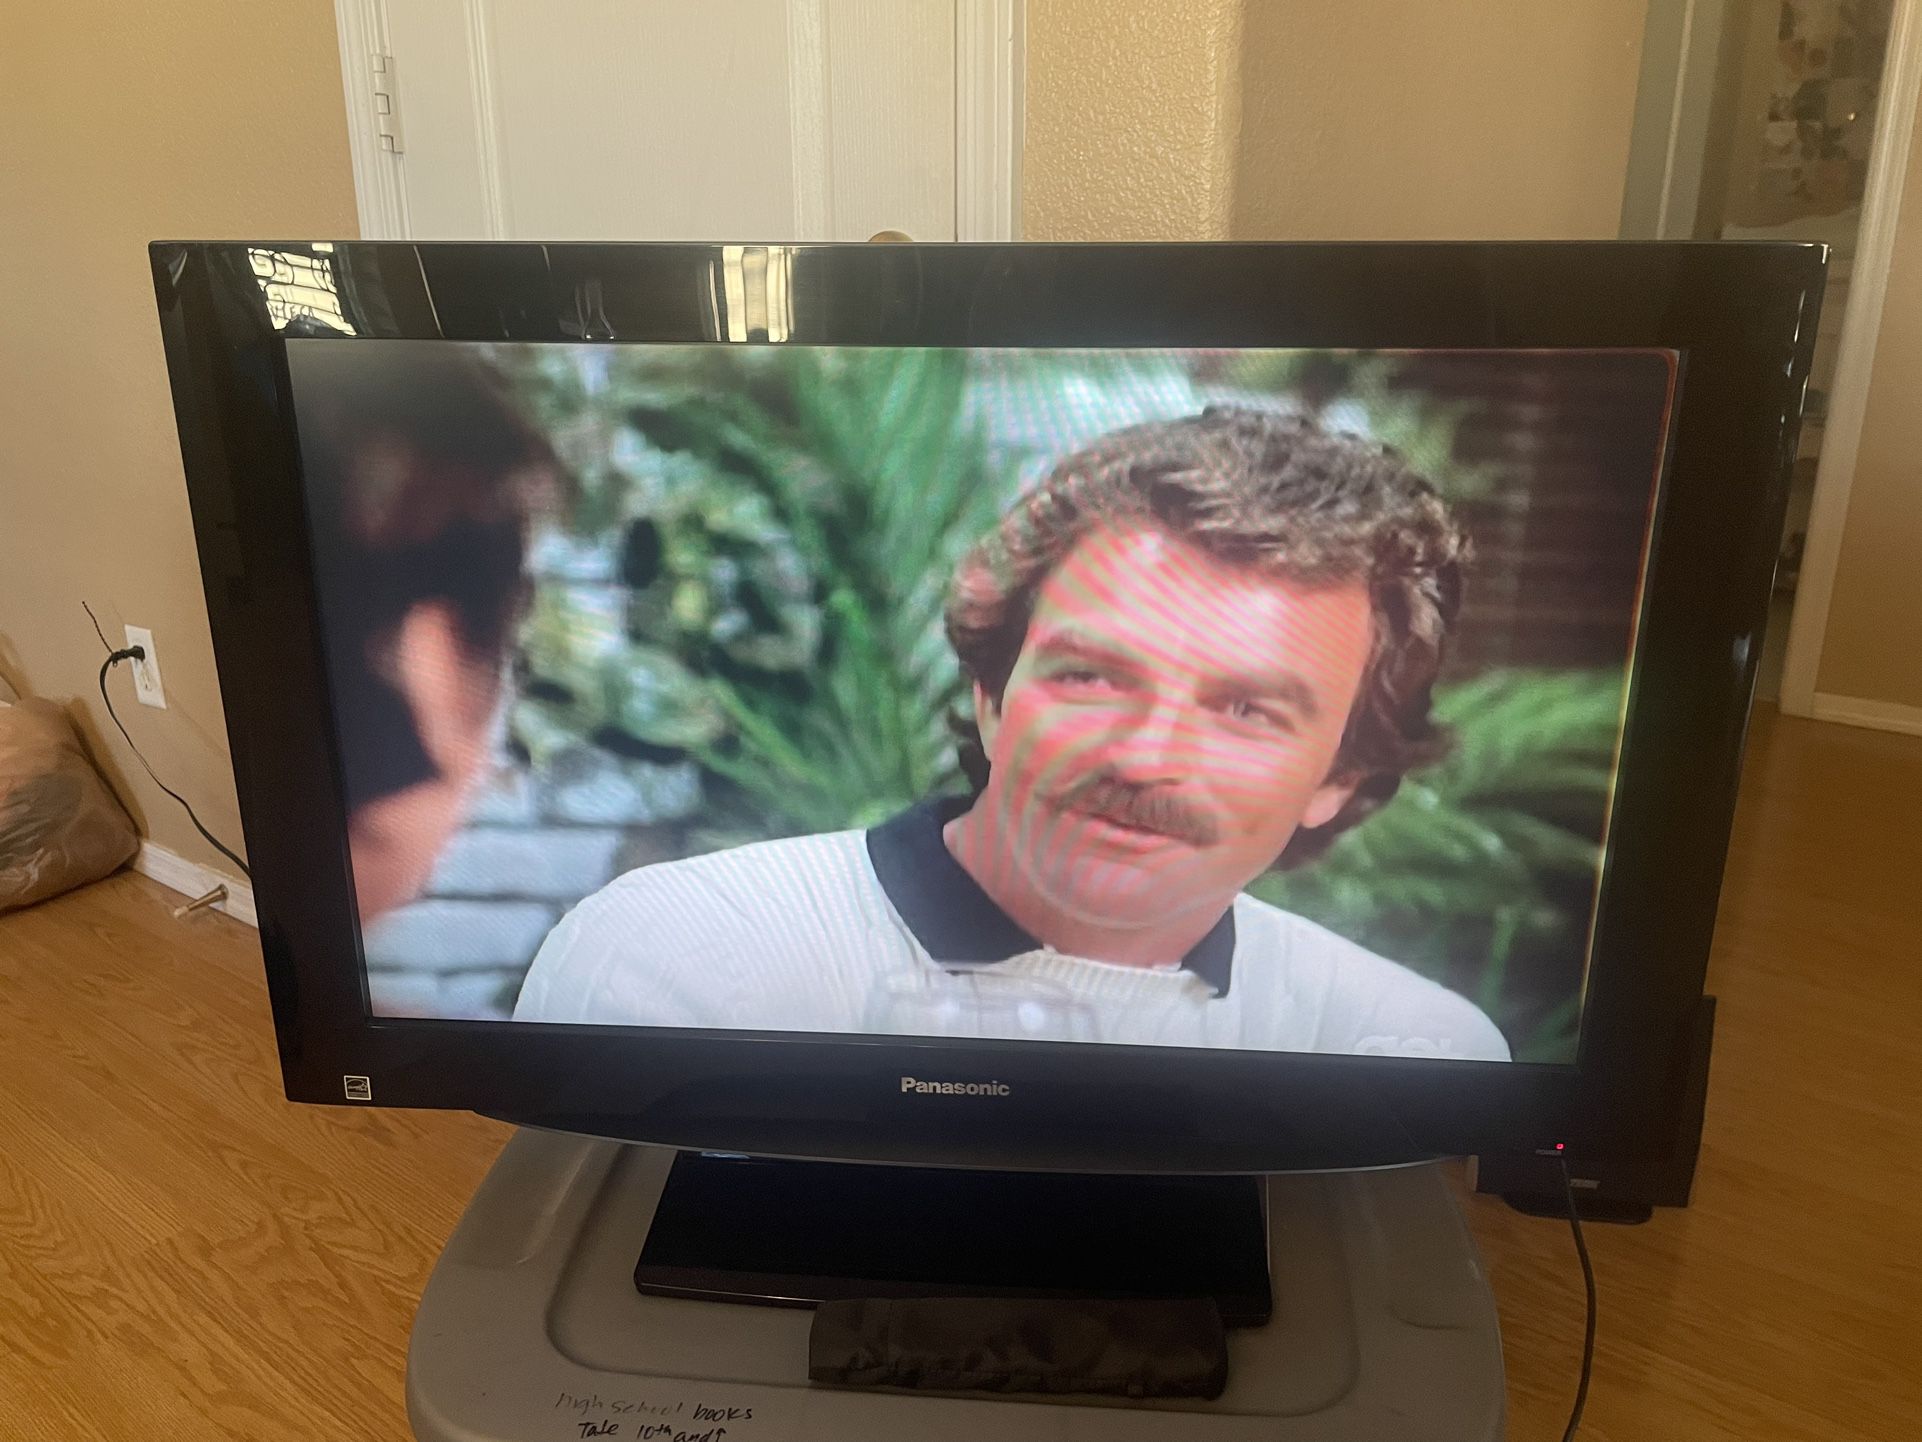 32” Panasonic LCD TV with remote